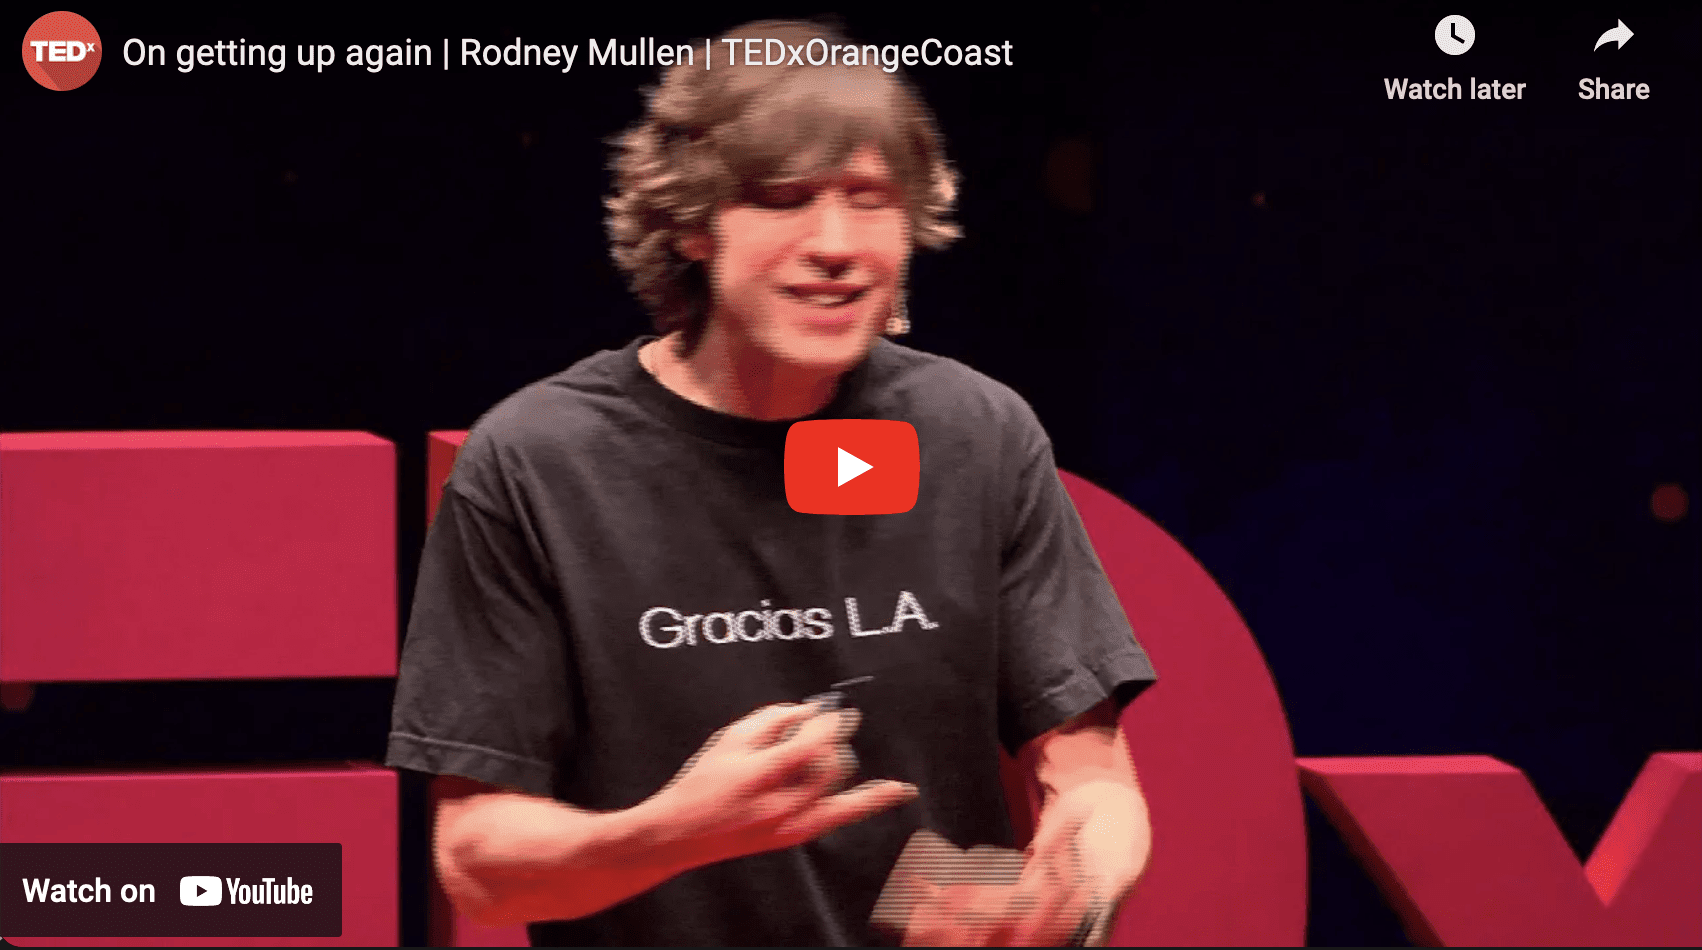 On Getting Up Again with Rodney Mullen